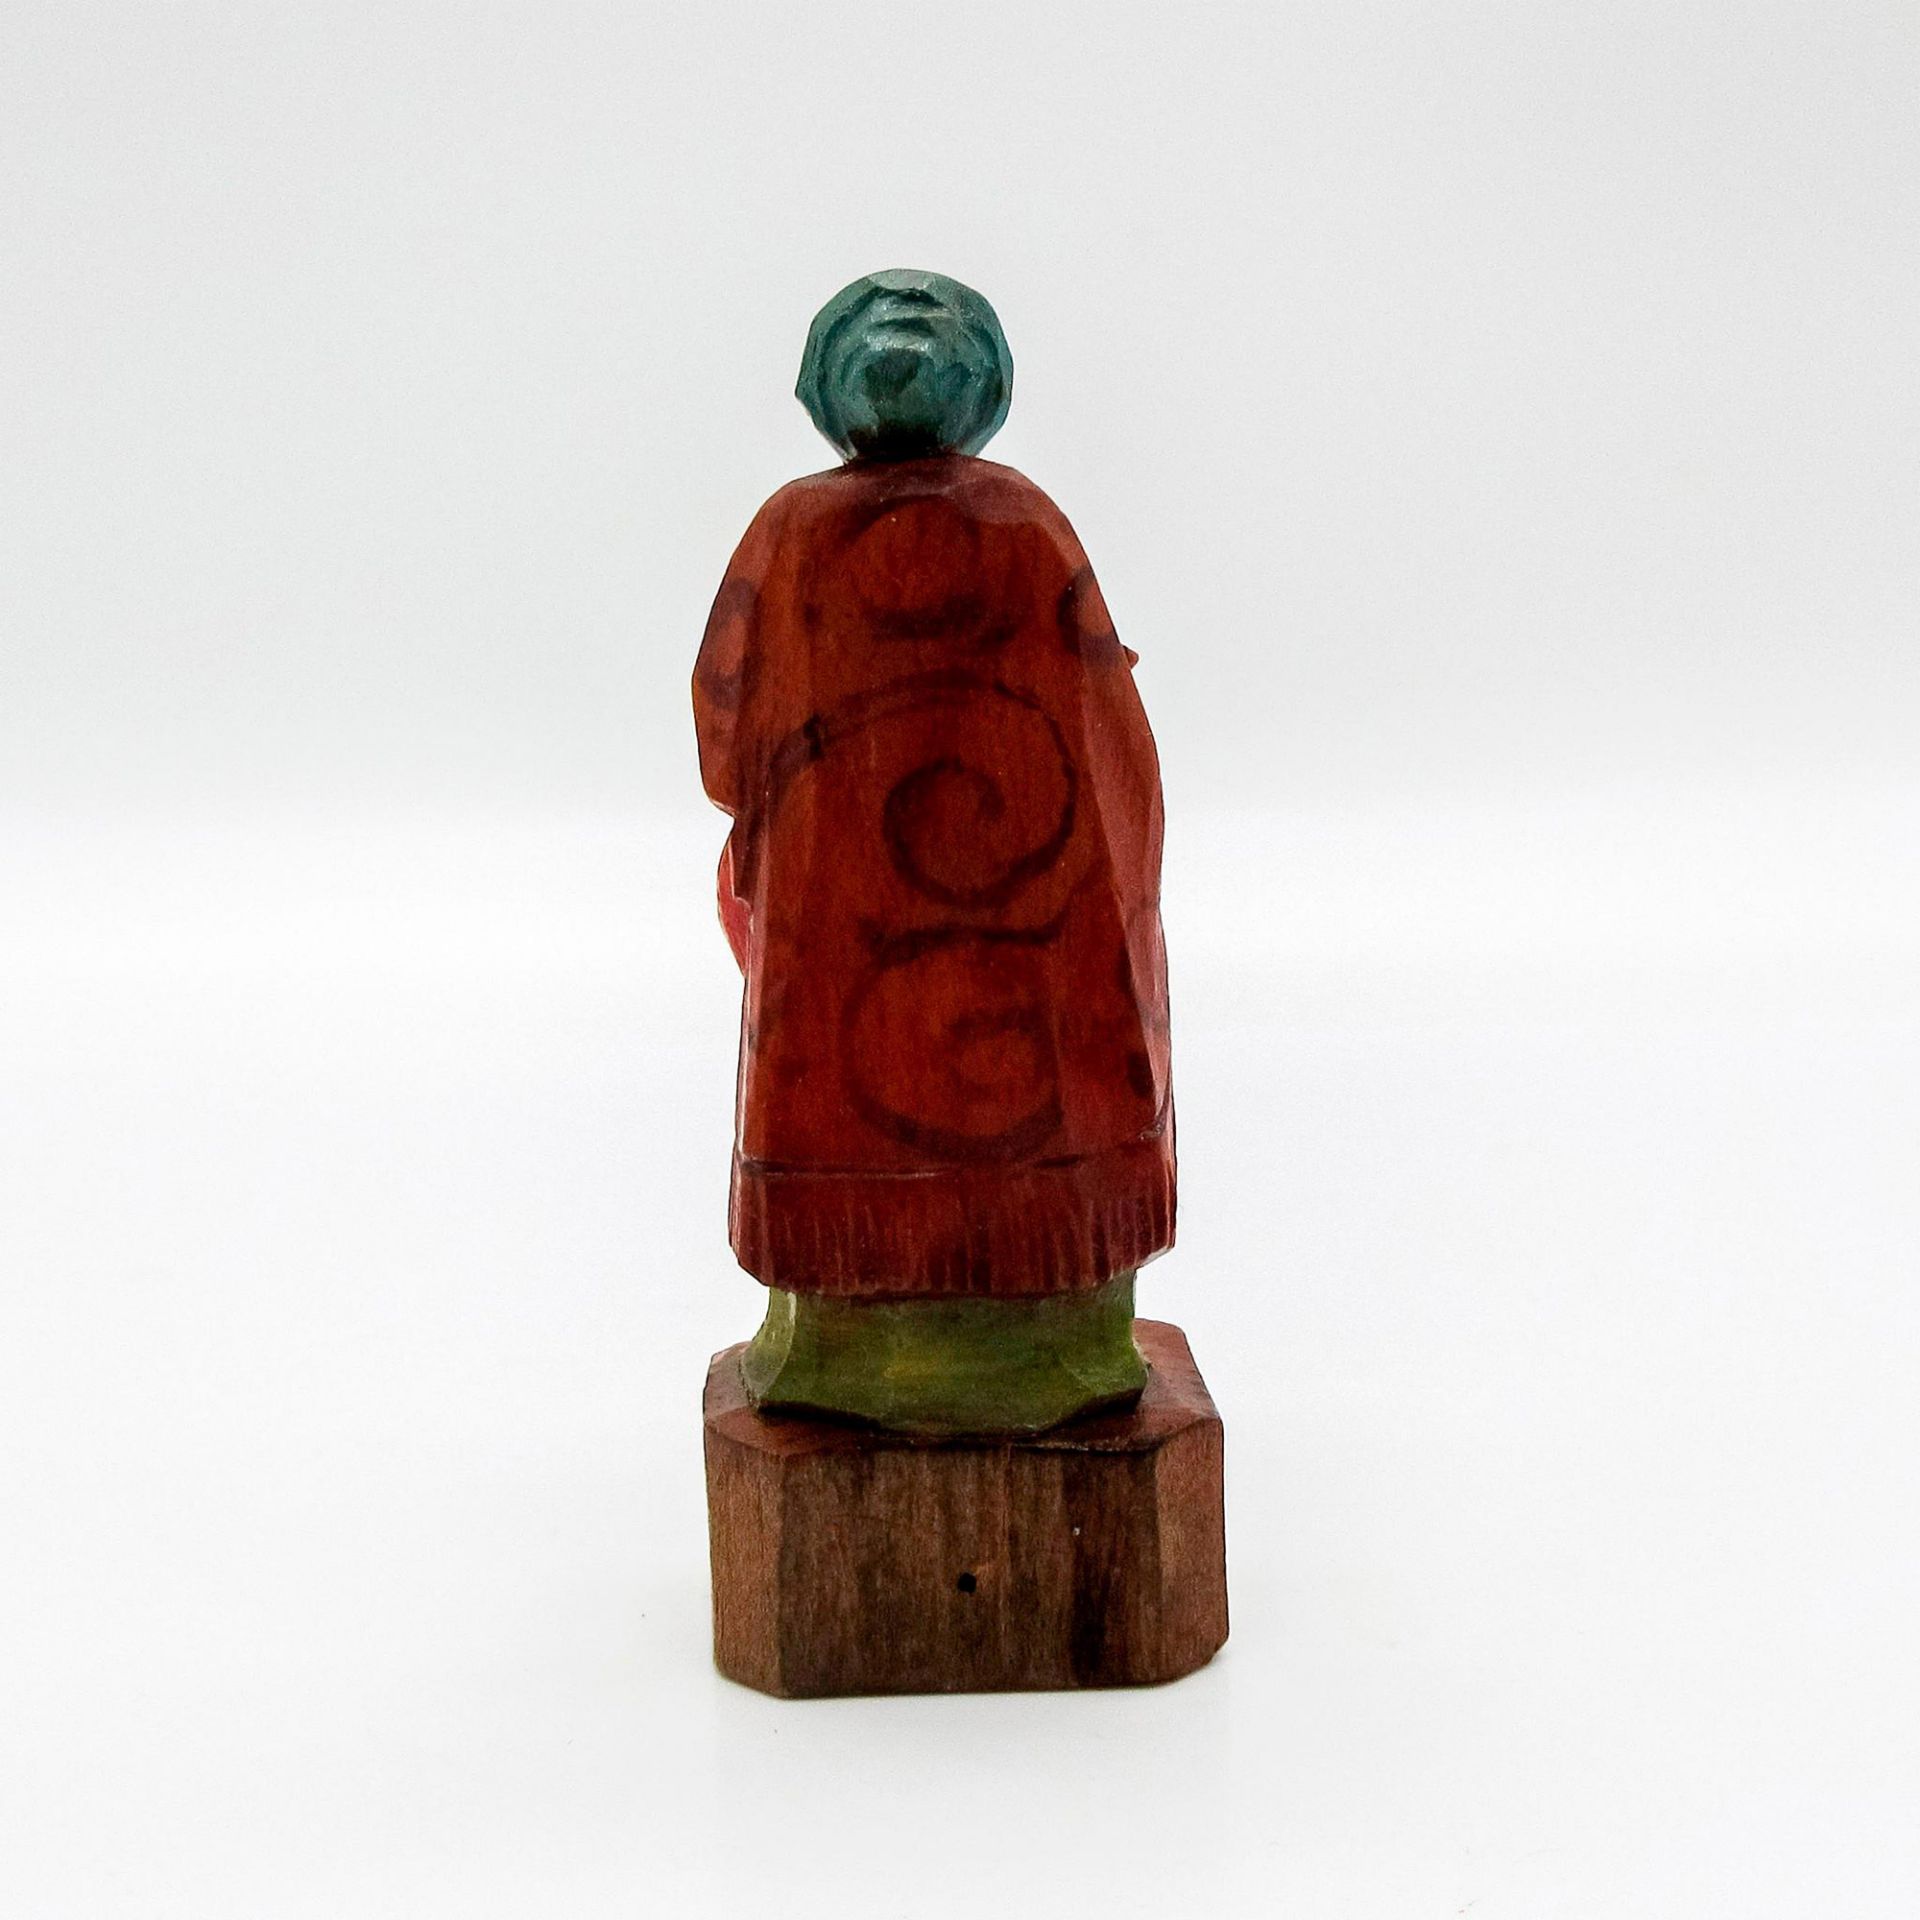 Hand Painted Dickens Miniature Wooden Carving, Mrs. Gamp - Image 2 of 3